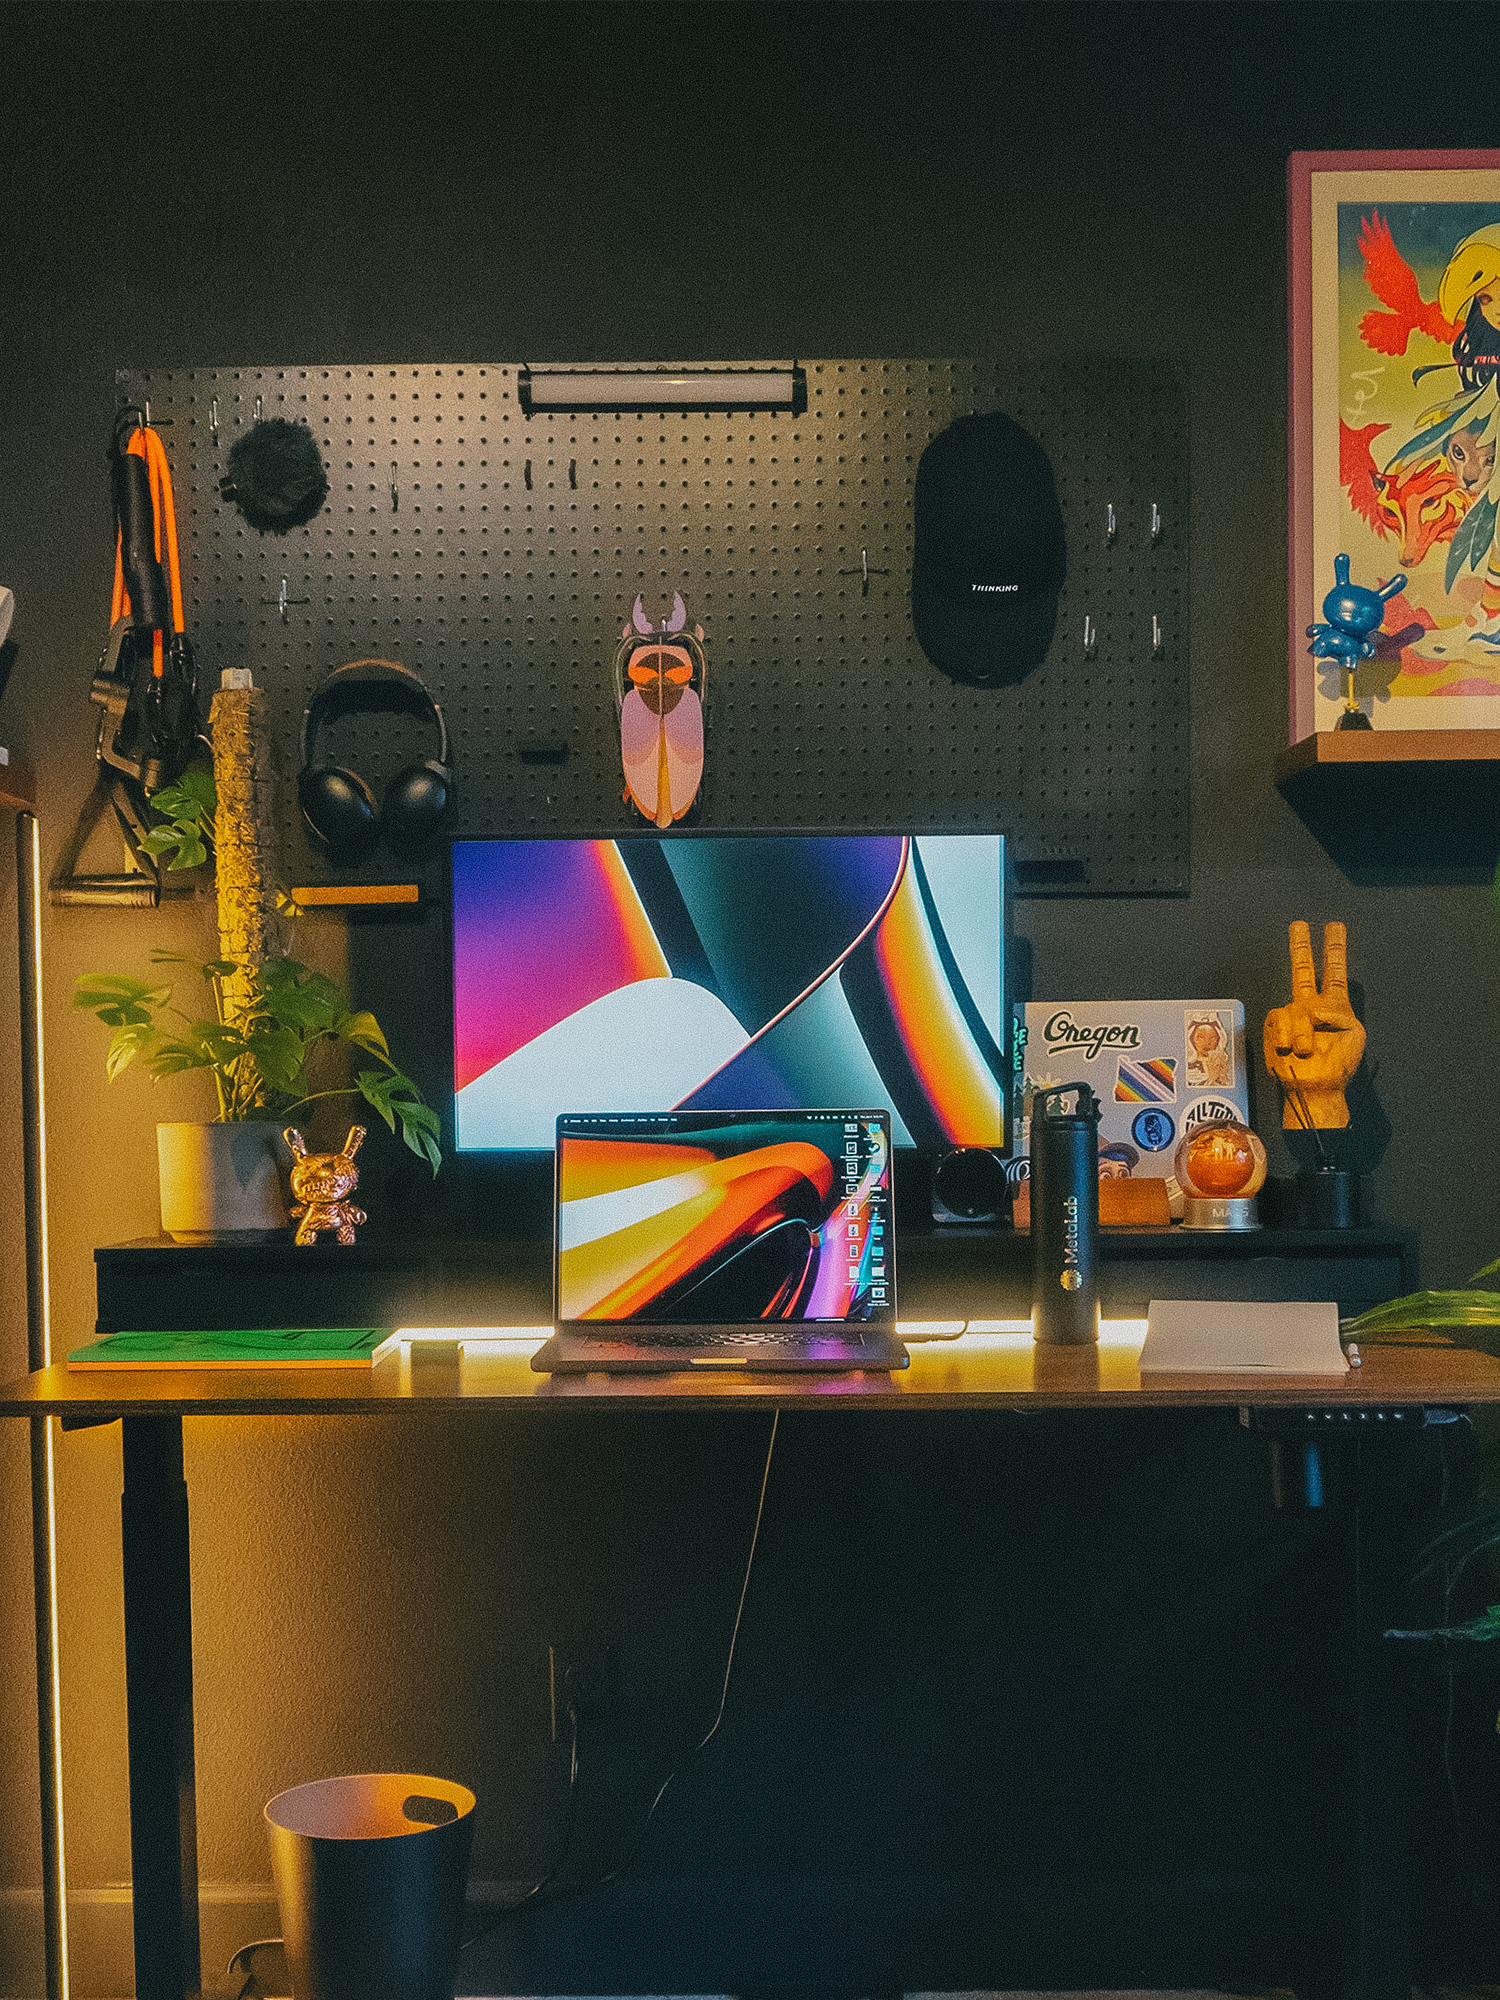 A remote desk set up with colourful background imagery and decor